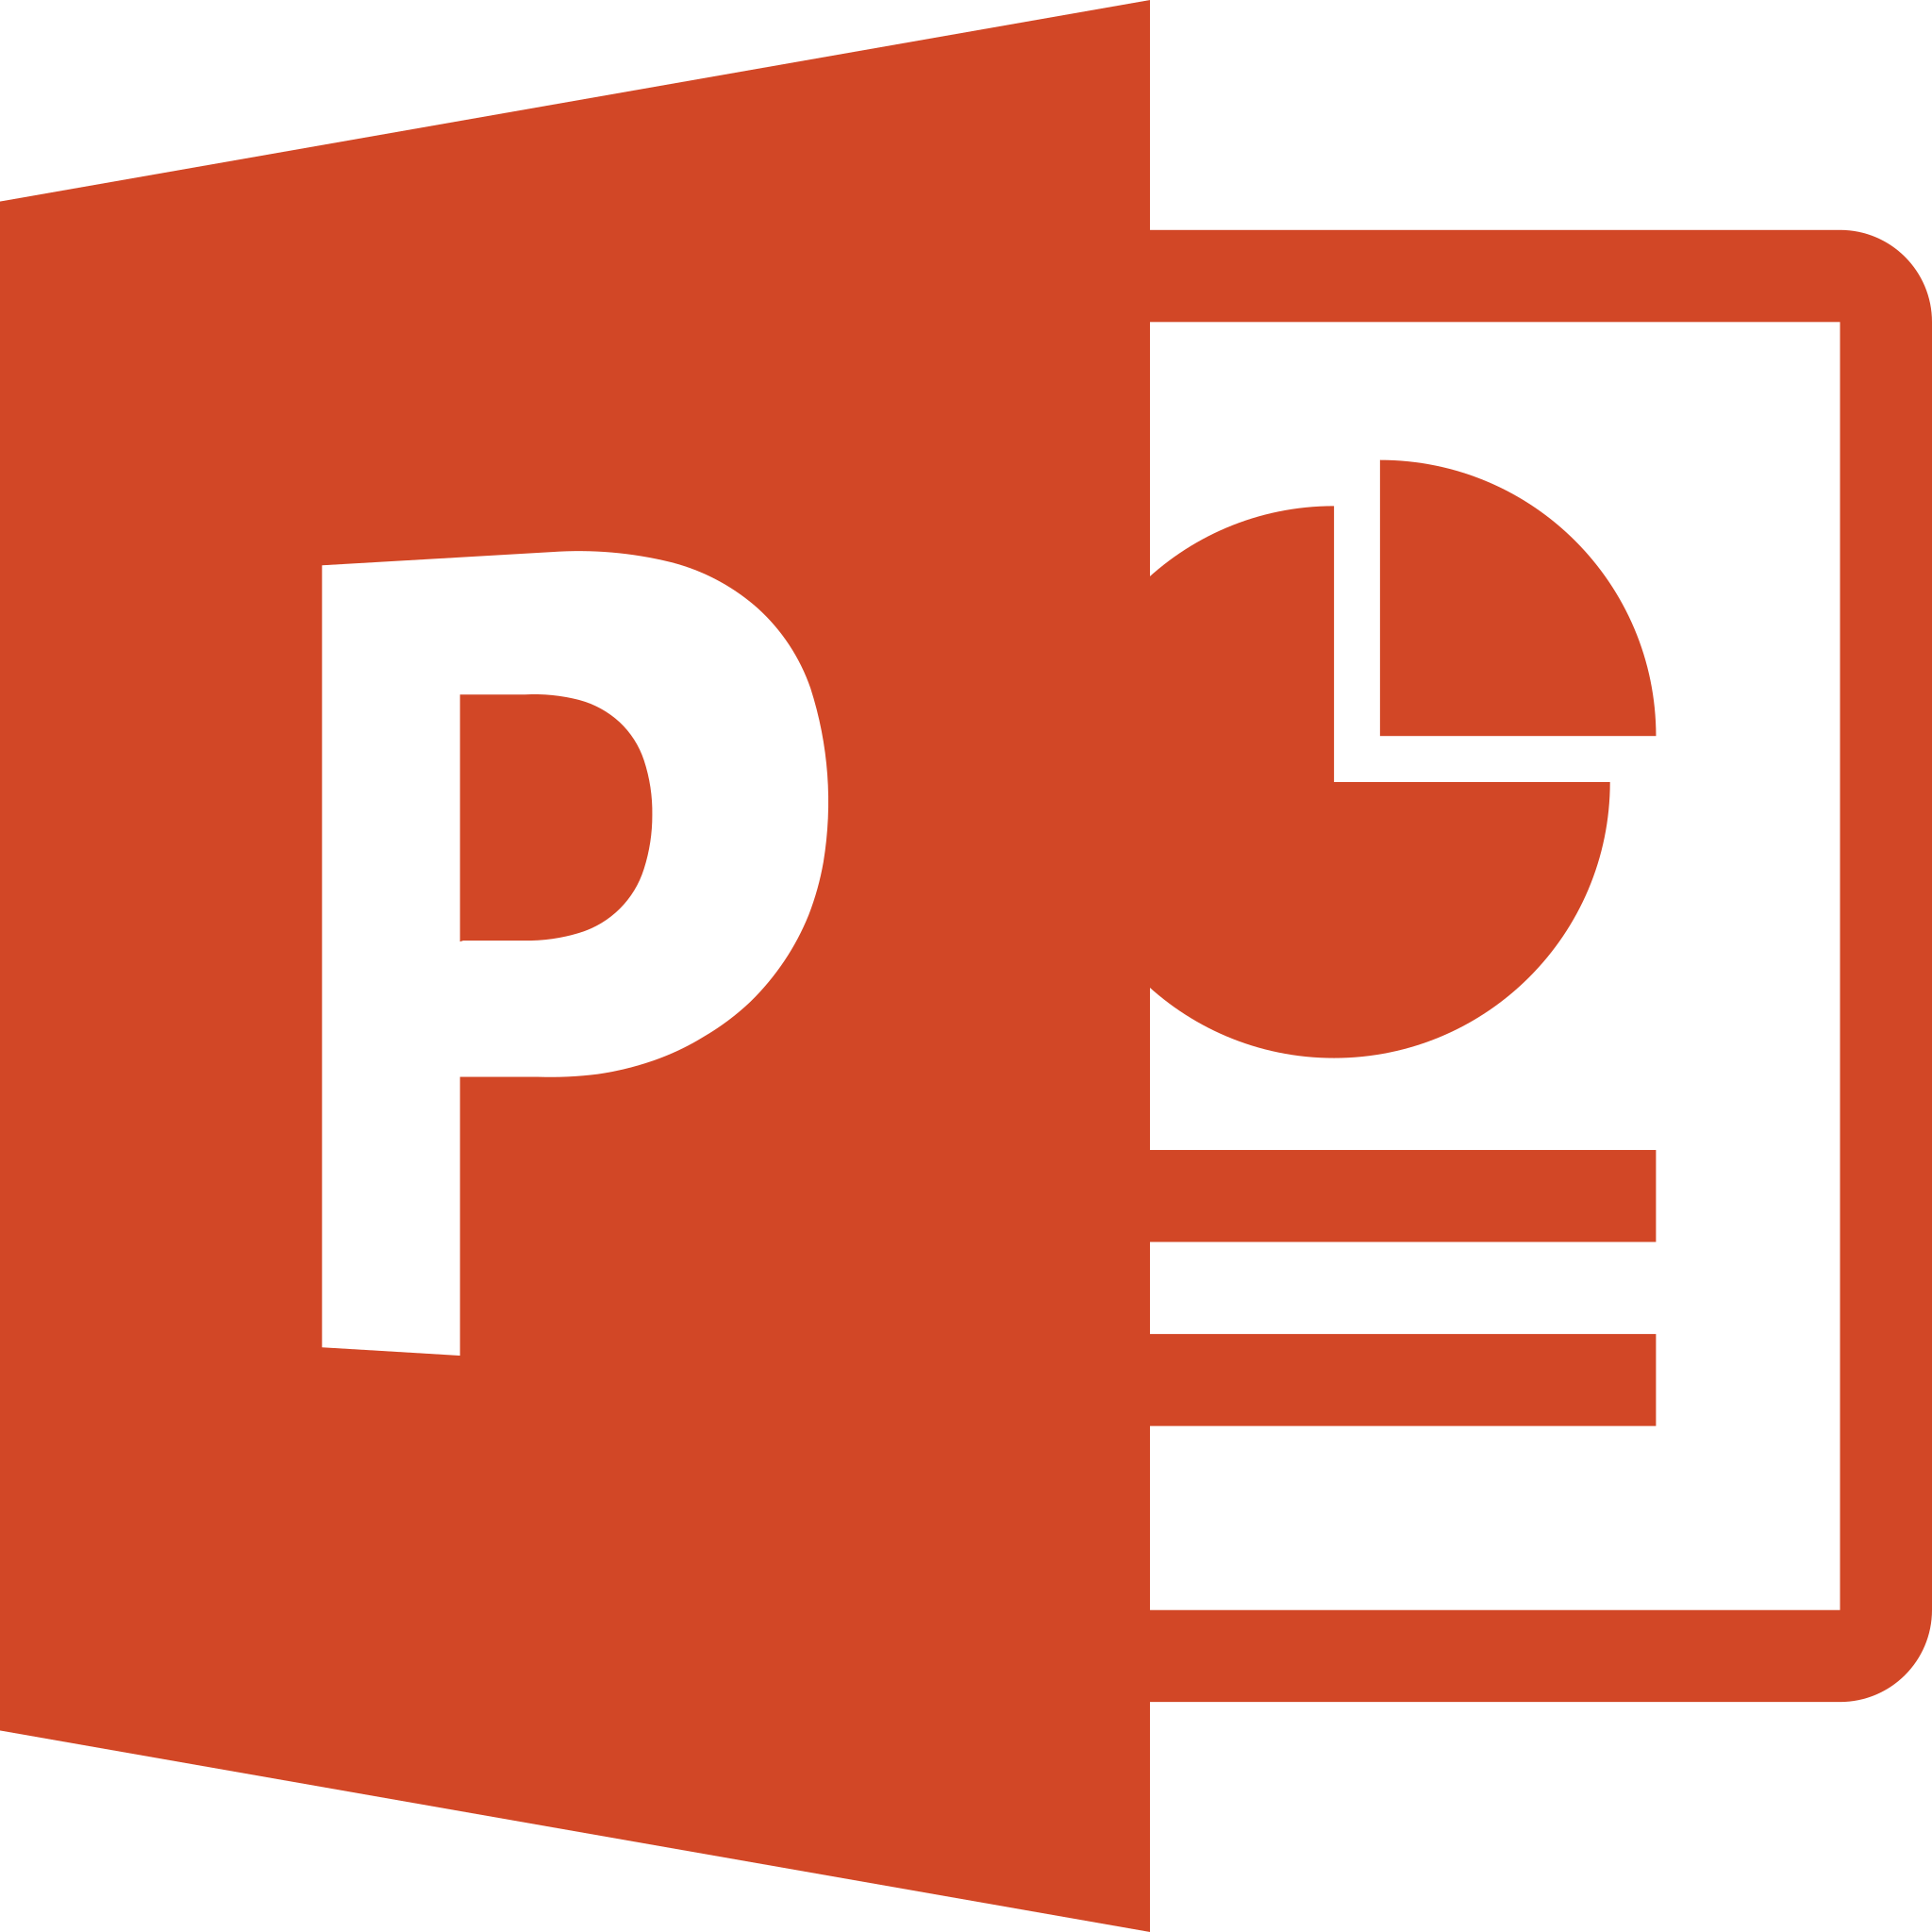 The icon for Microsoft PowerPoint